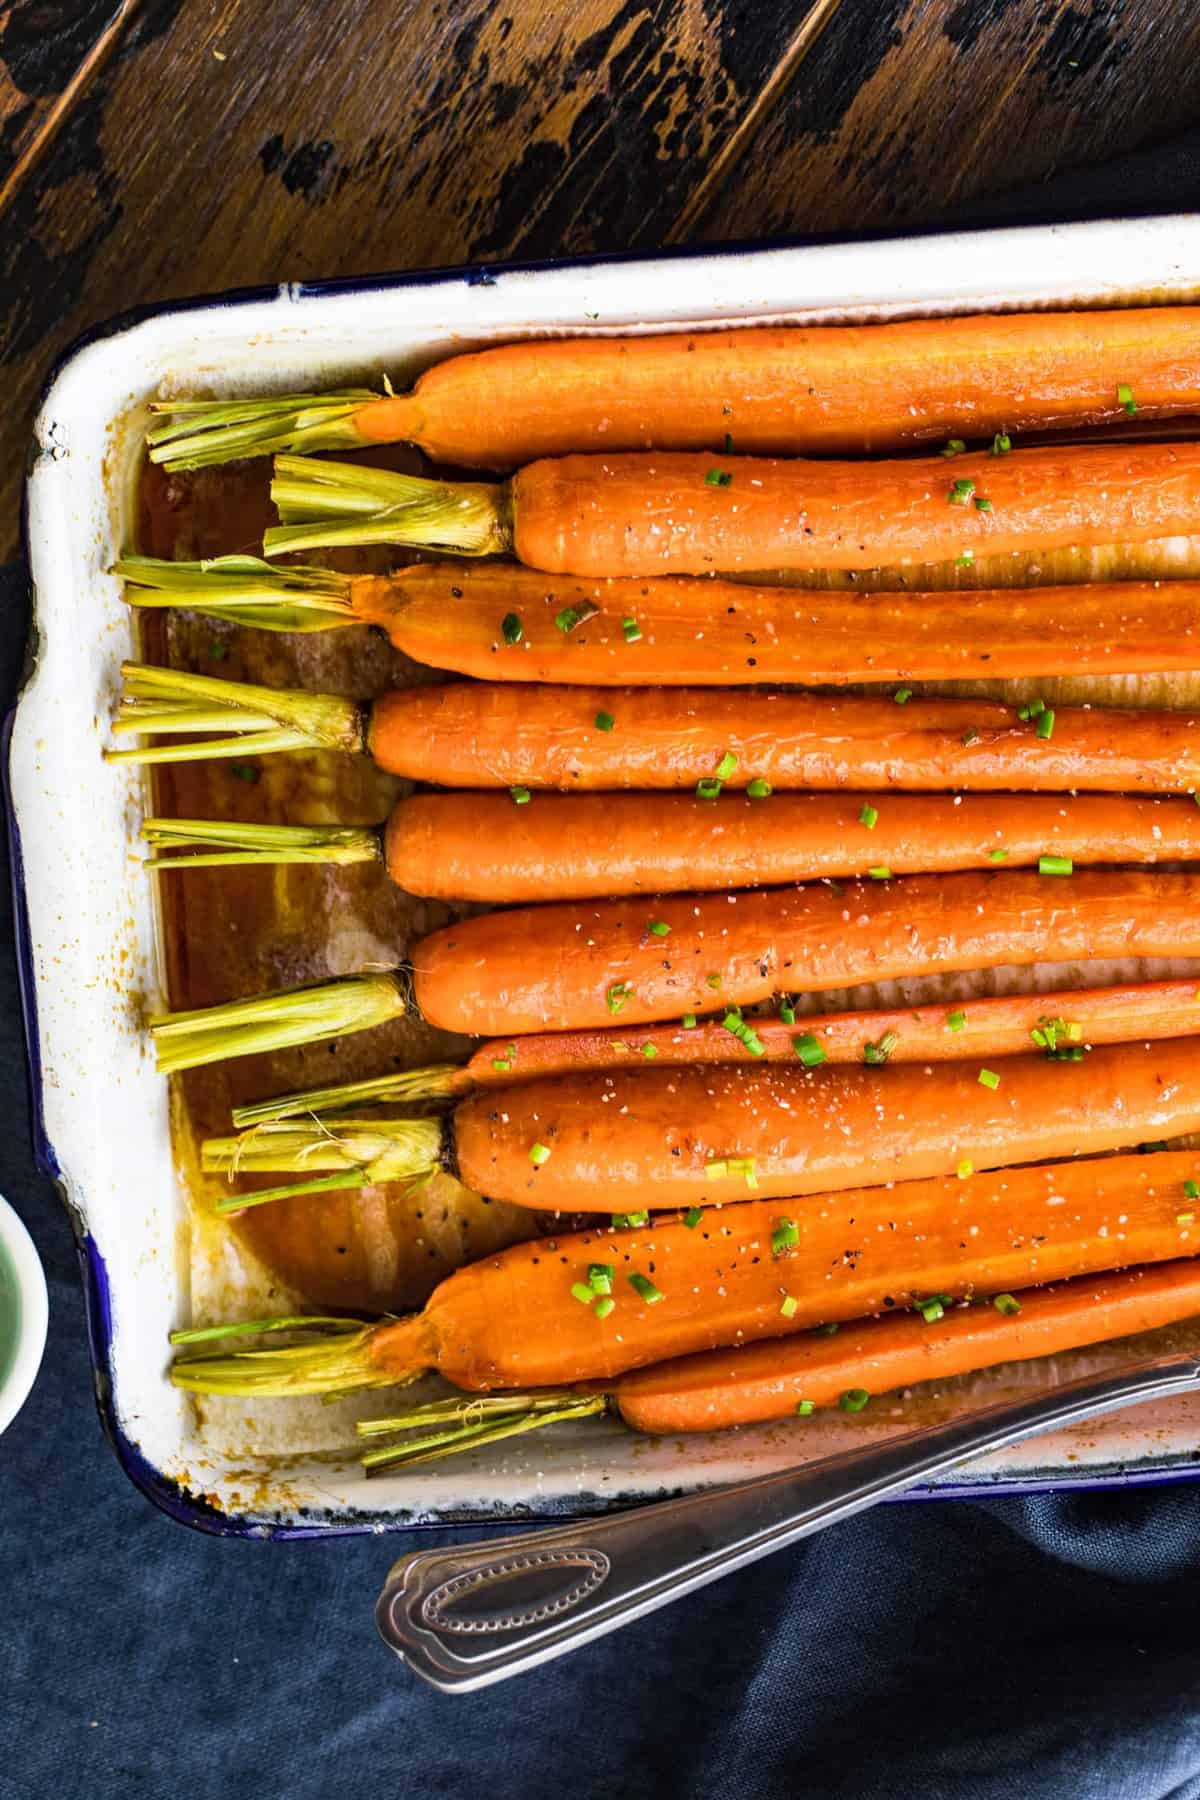 Brown Butter Glazed Carrots with their tops still on